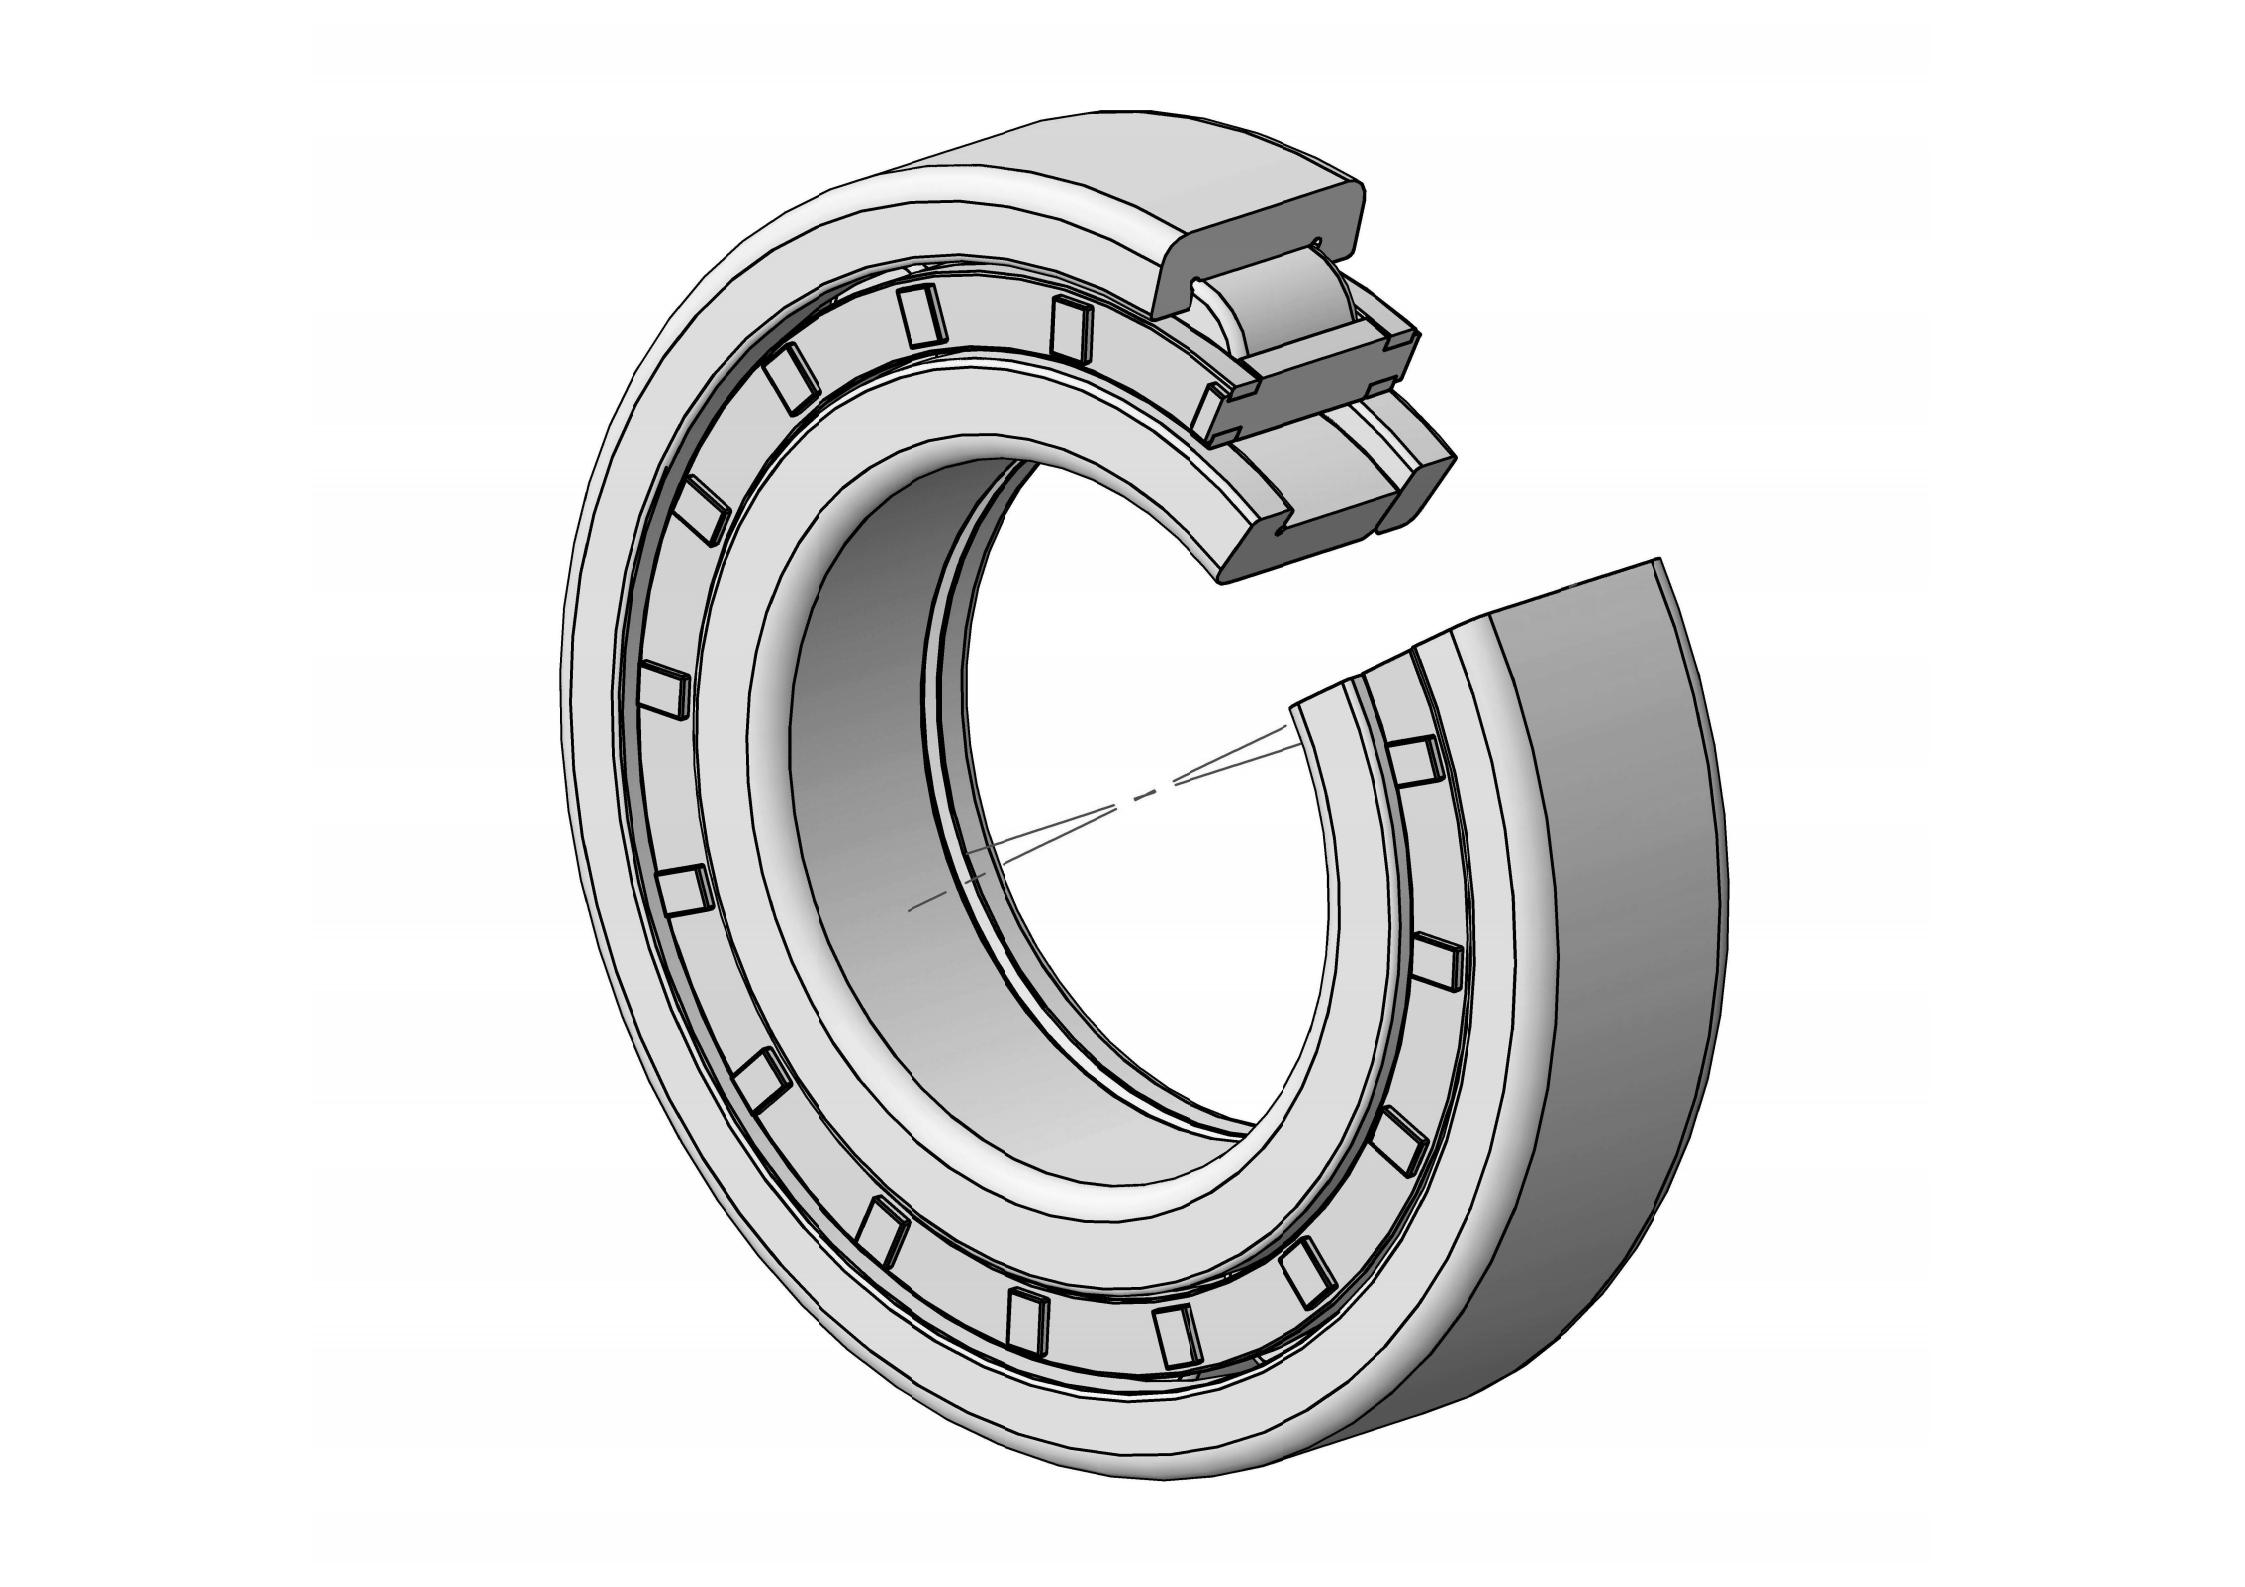 NUP2209-E Single Row Cylindrical roller bearing 